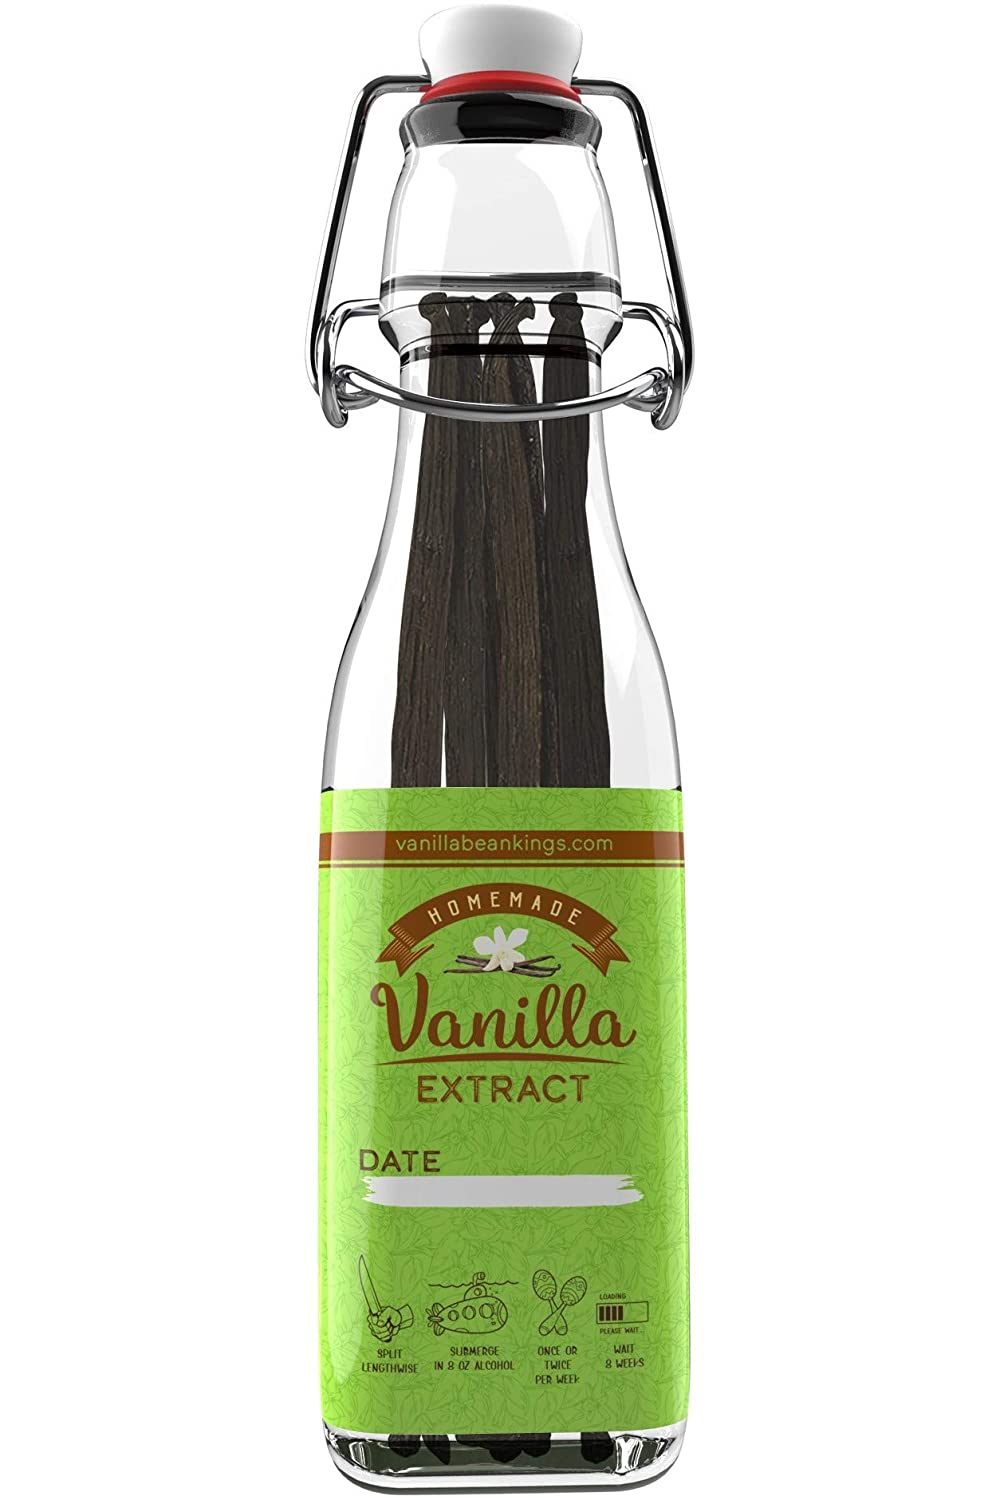 How To Store Vanilla Beans